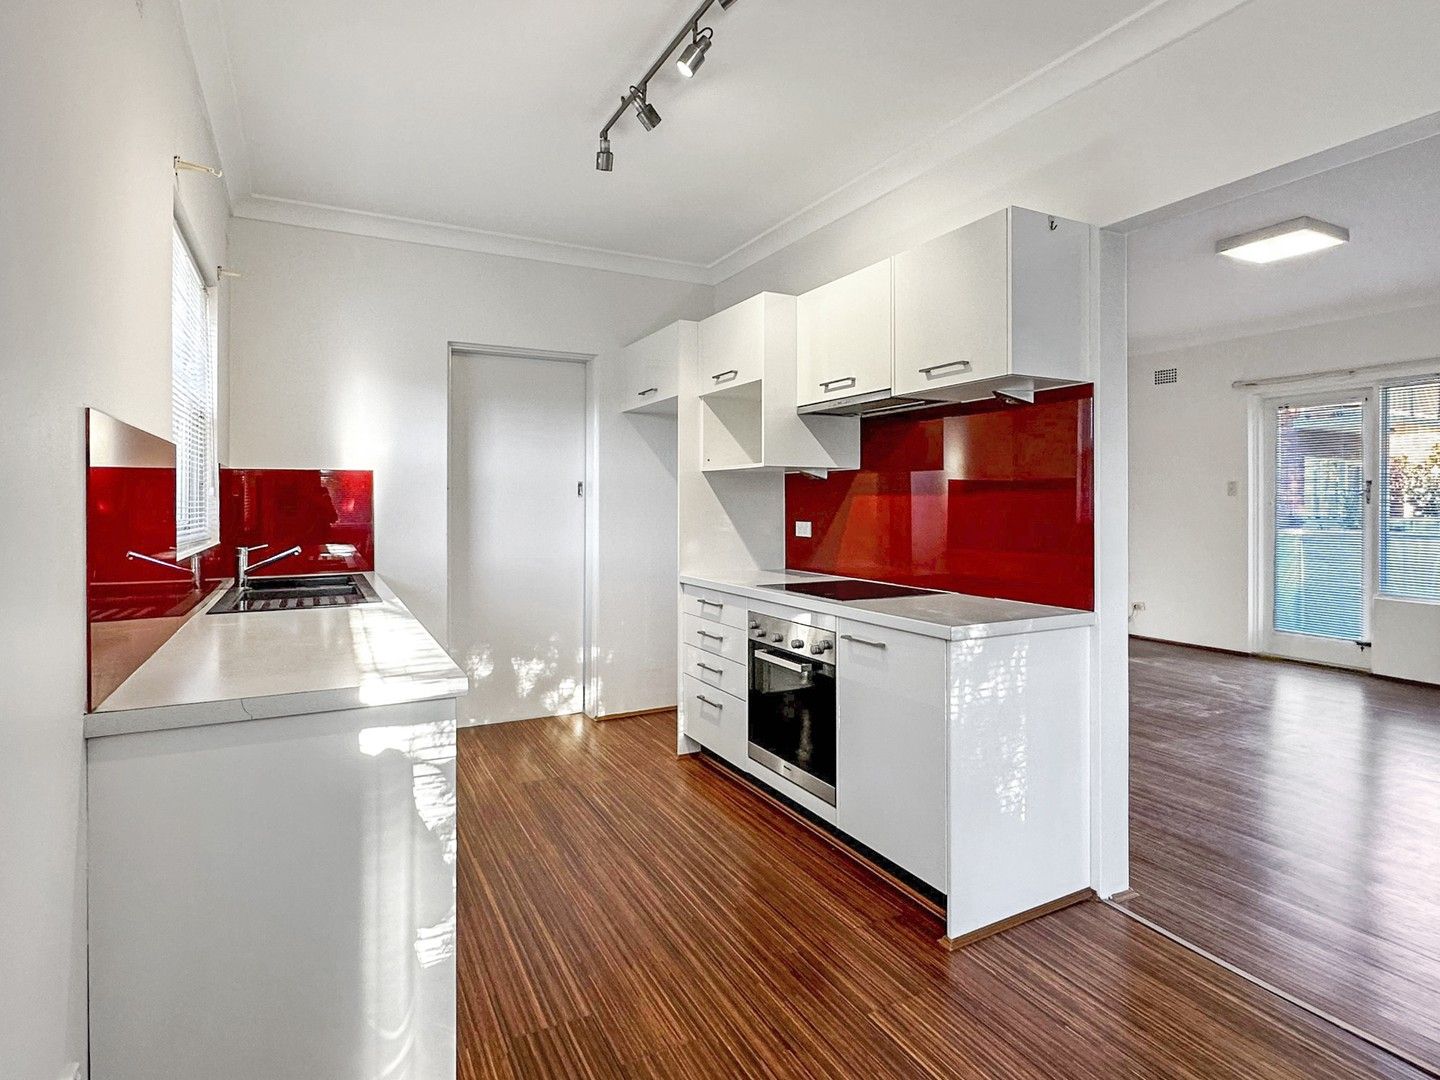 2 bedrooms Apartment / Unit / Flat in 1/27-29 Noble Street ALLAWAH NSW, 2218